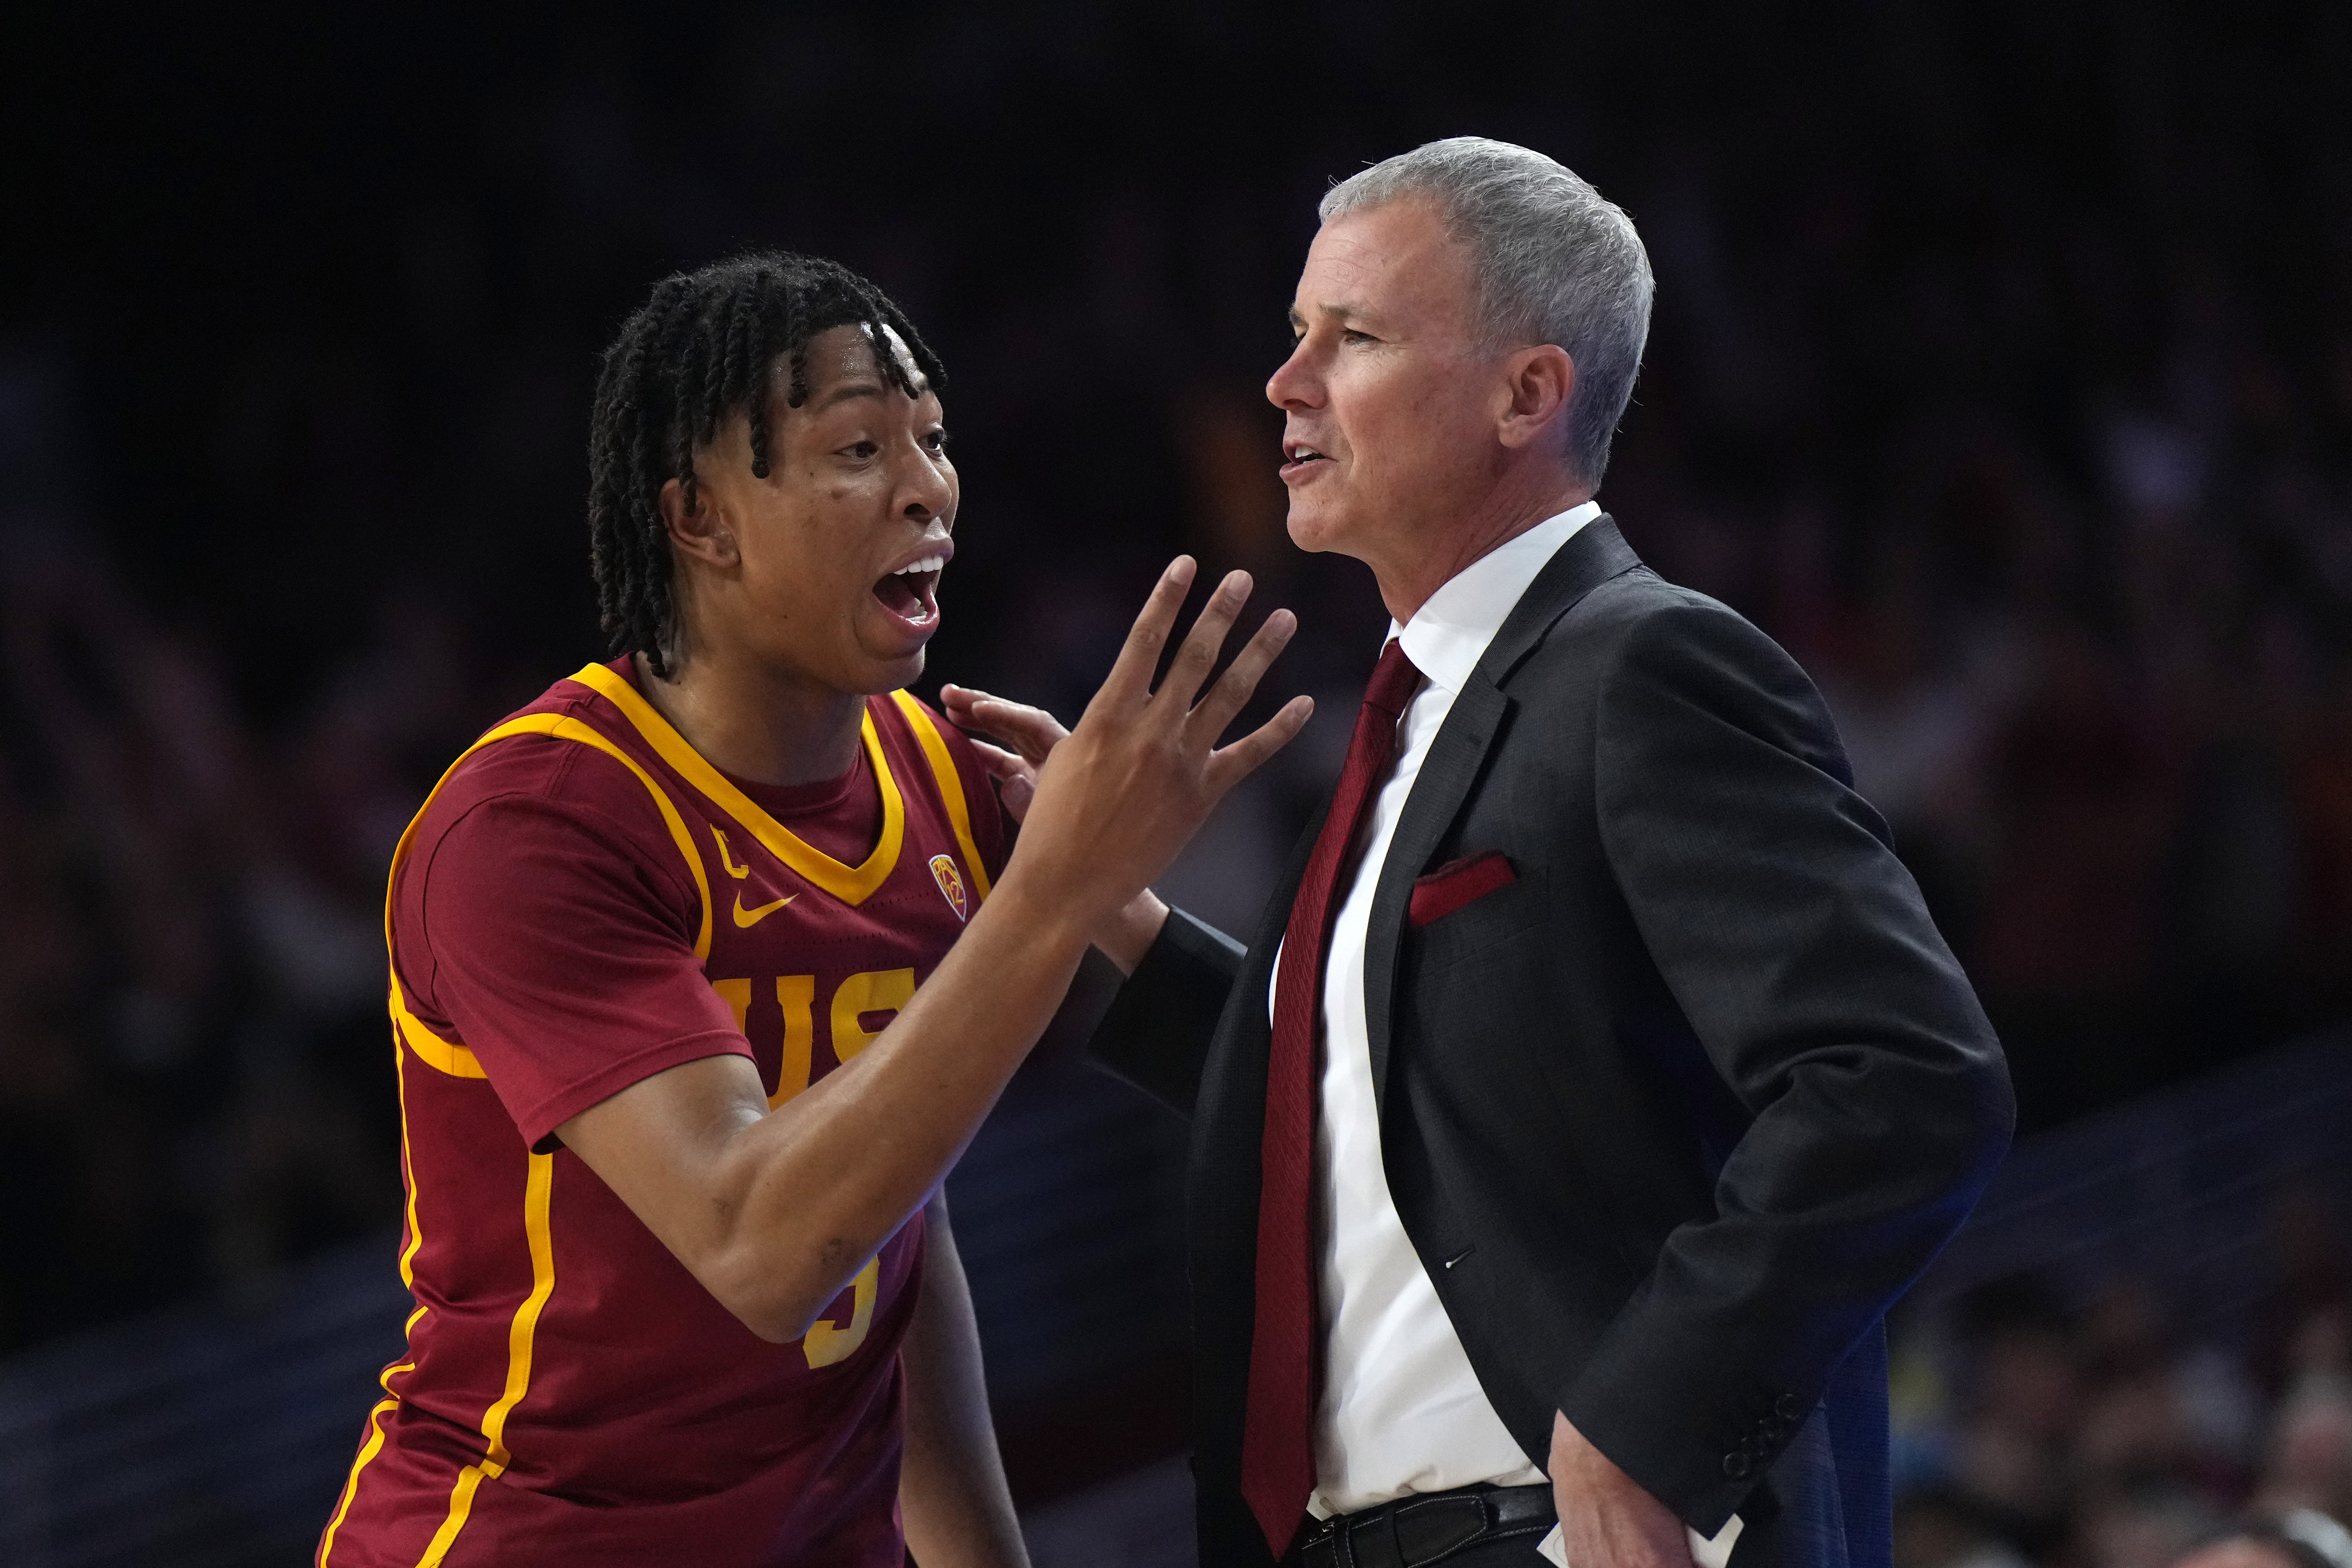 Andy Enfield landed the plane safely this year for USC men’s basketball